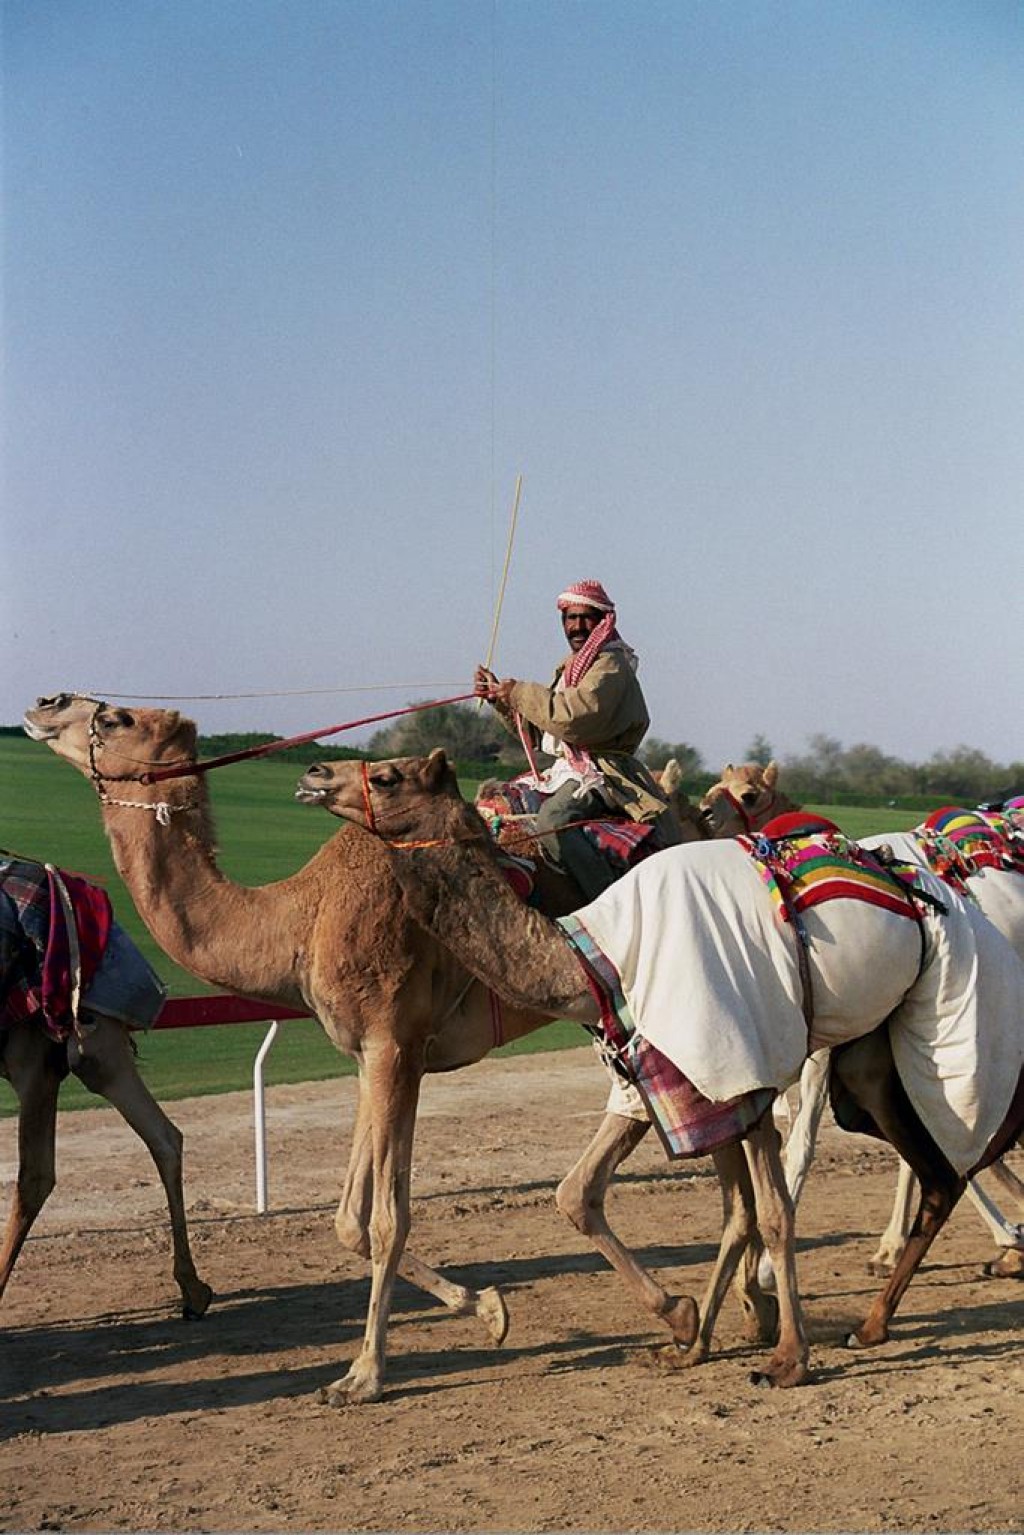 As part of our tour with Arabian Adventures, we visited the Al Wathba Camel Race Track outside Abu Dhabi.